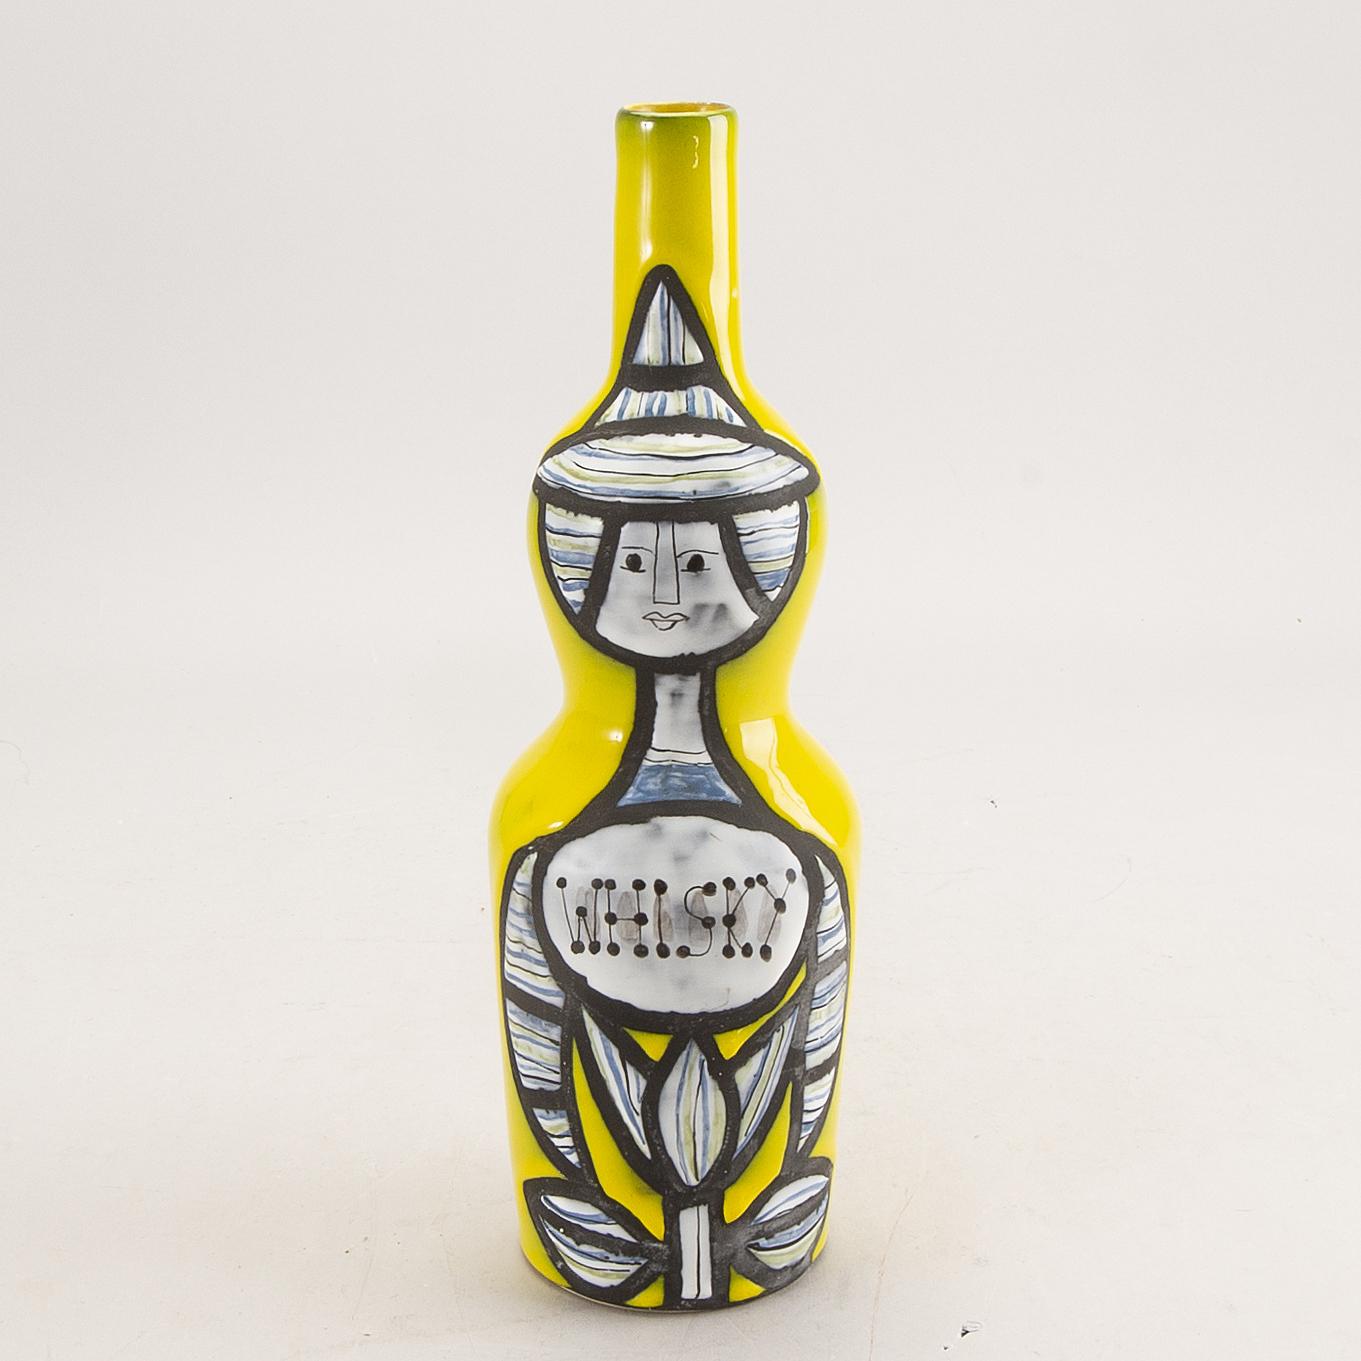 Roger Capron (1922-2006)
Shiny yellow with Stylized personnage bottle 